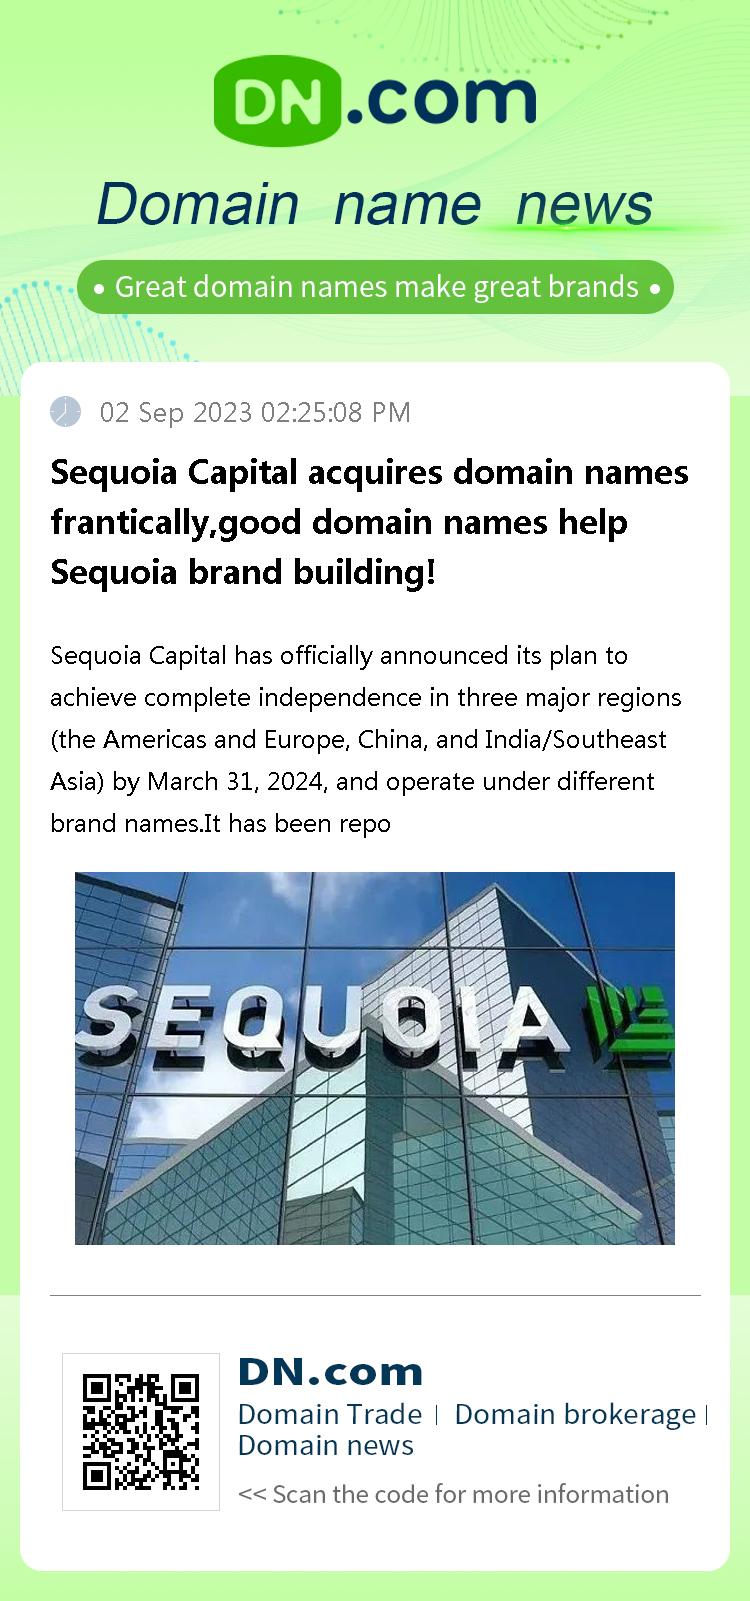 Sequoia Capital acquires domain names frantically,good domain names help Sequoia brand building!